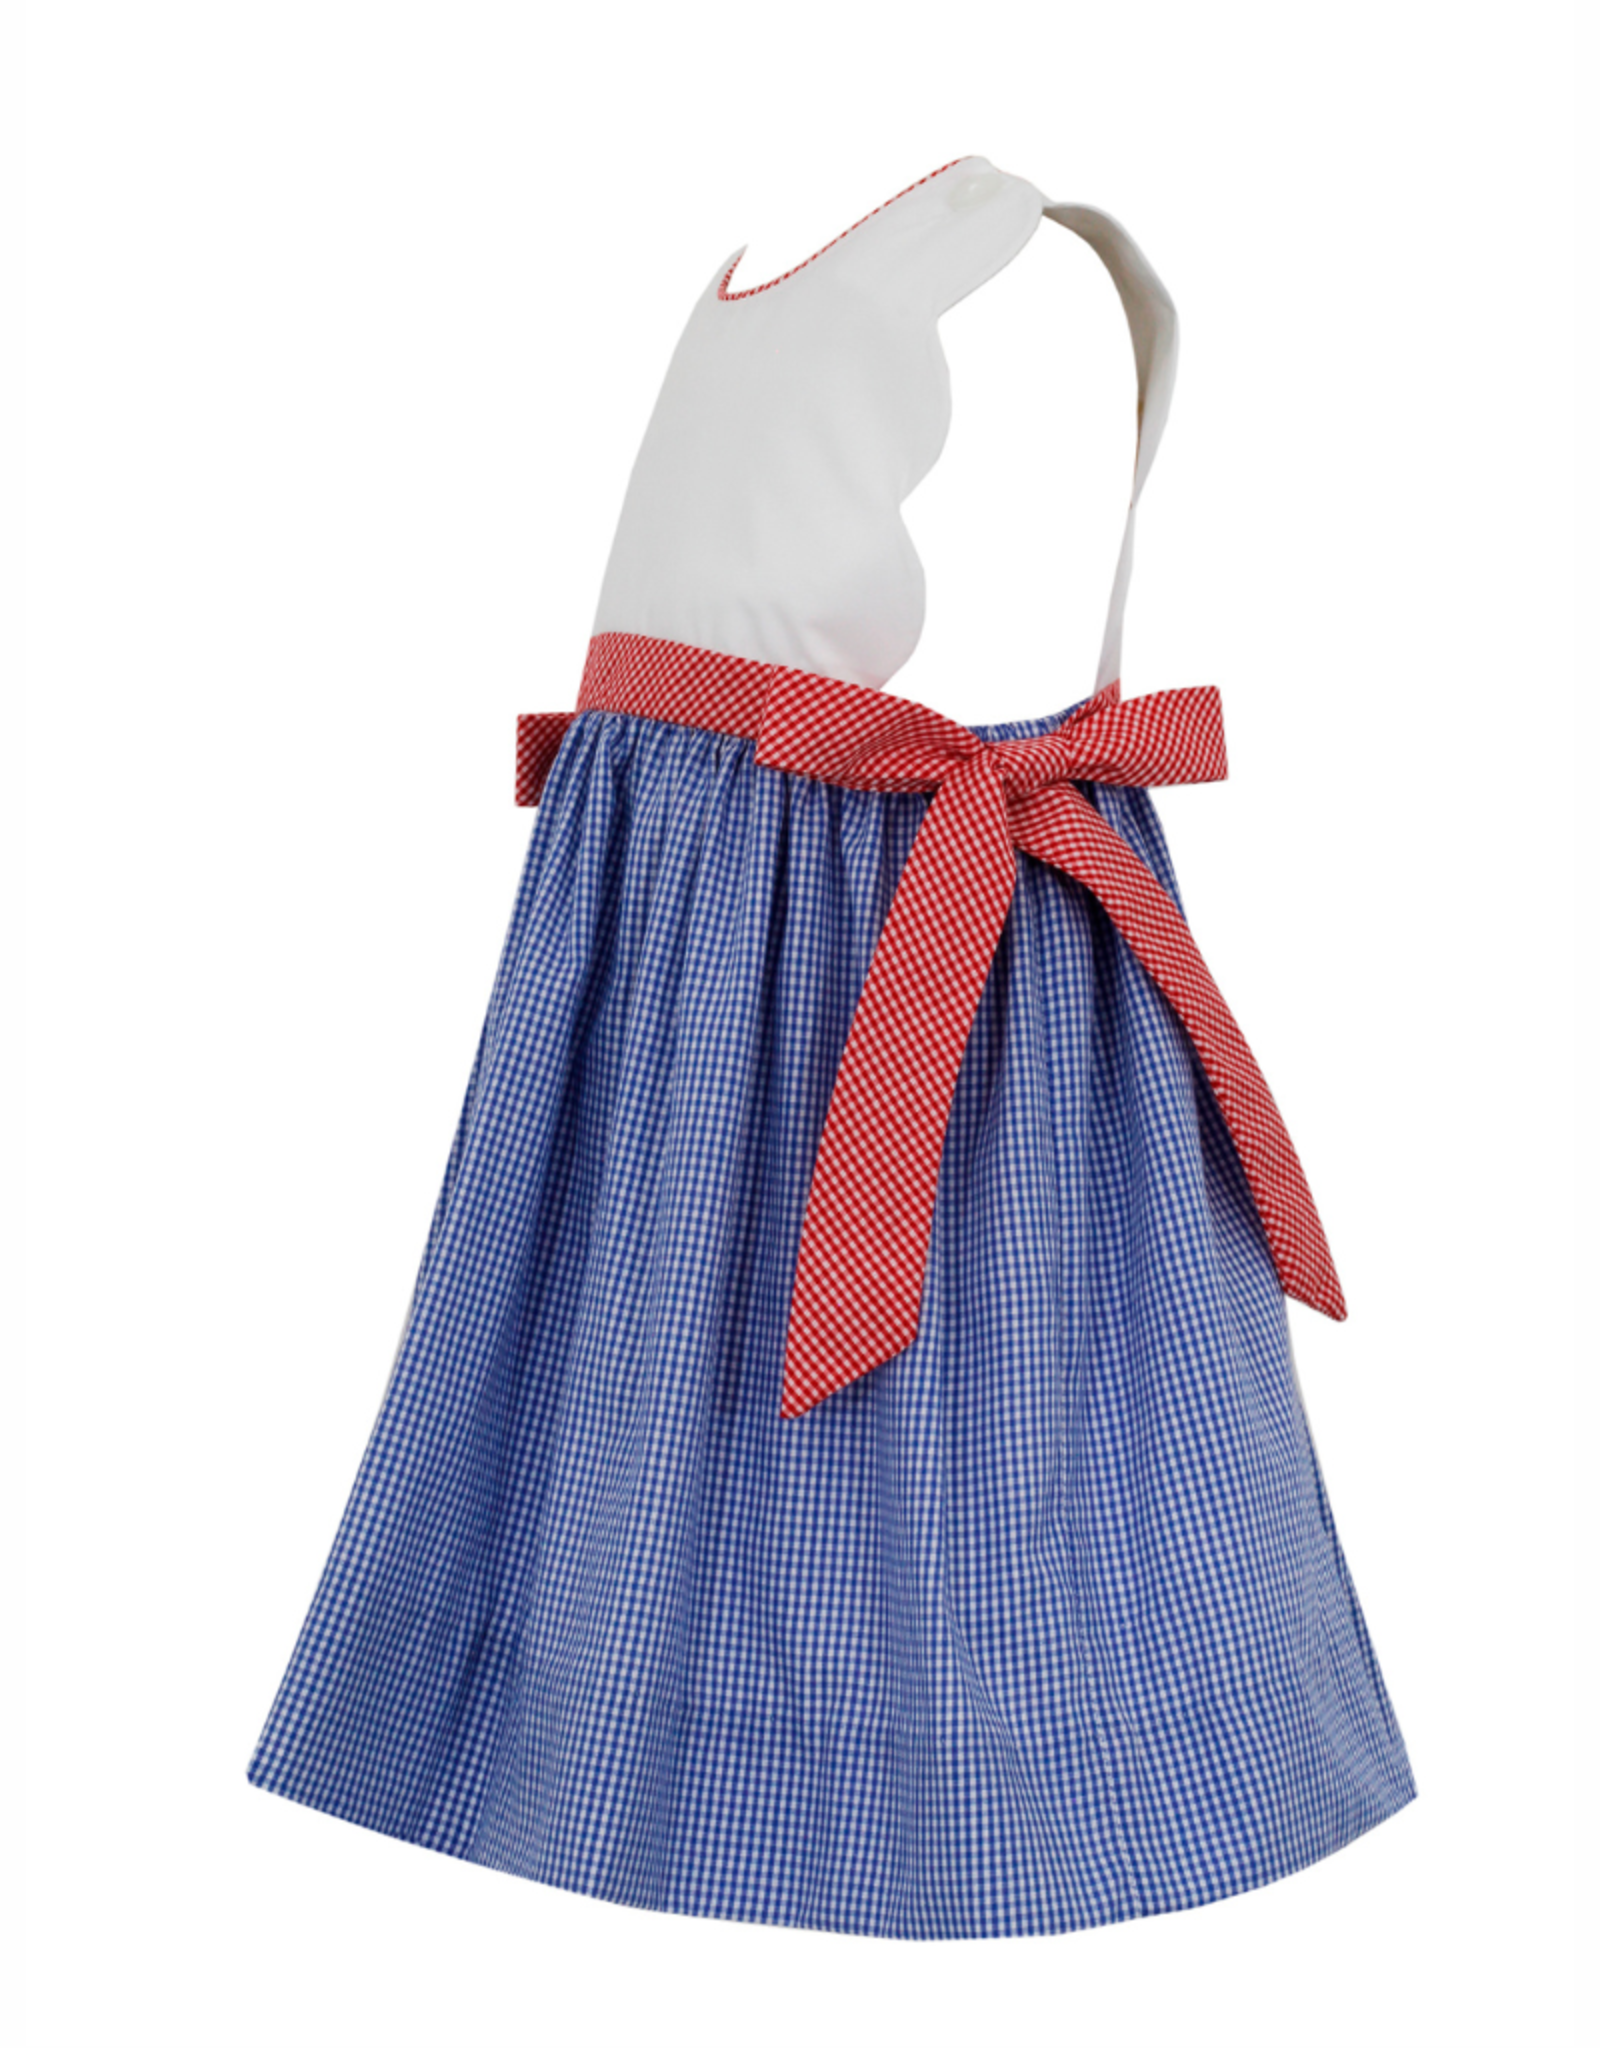 Petit Bebe Royal Blue Scallop Sundress with Red Gingham Side Bows